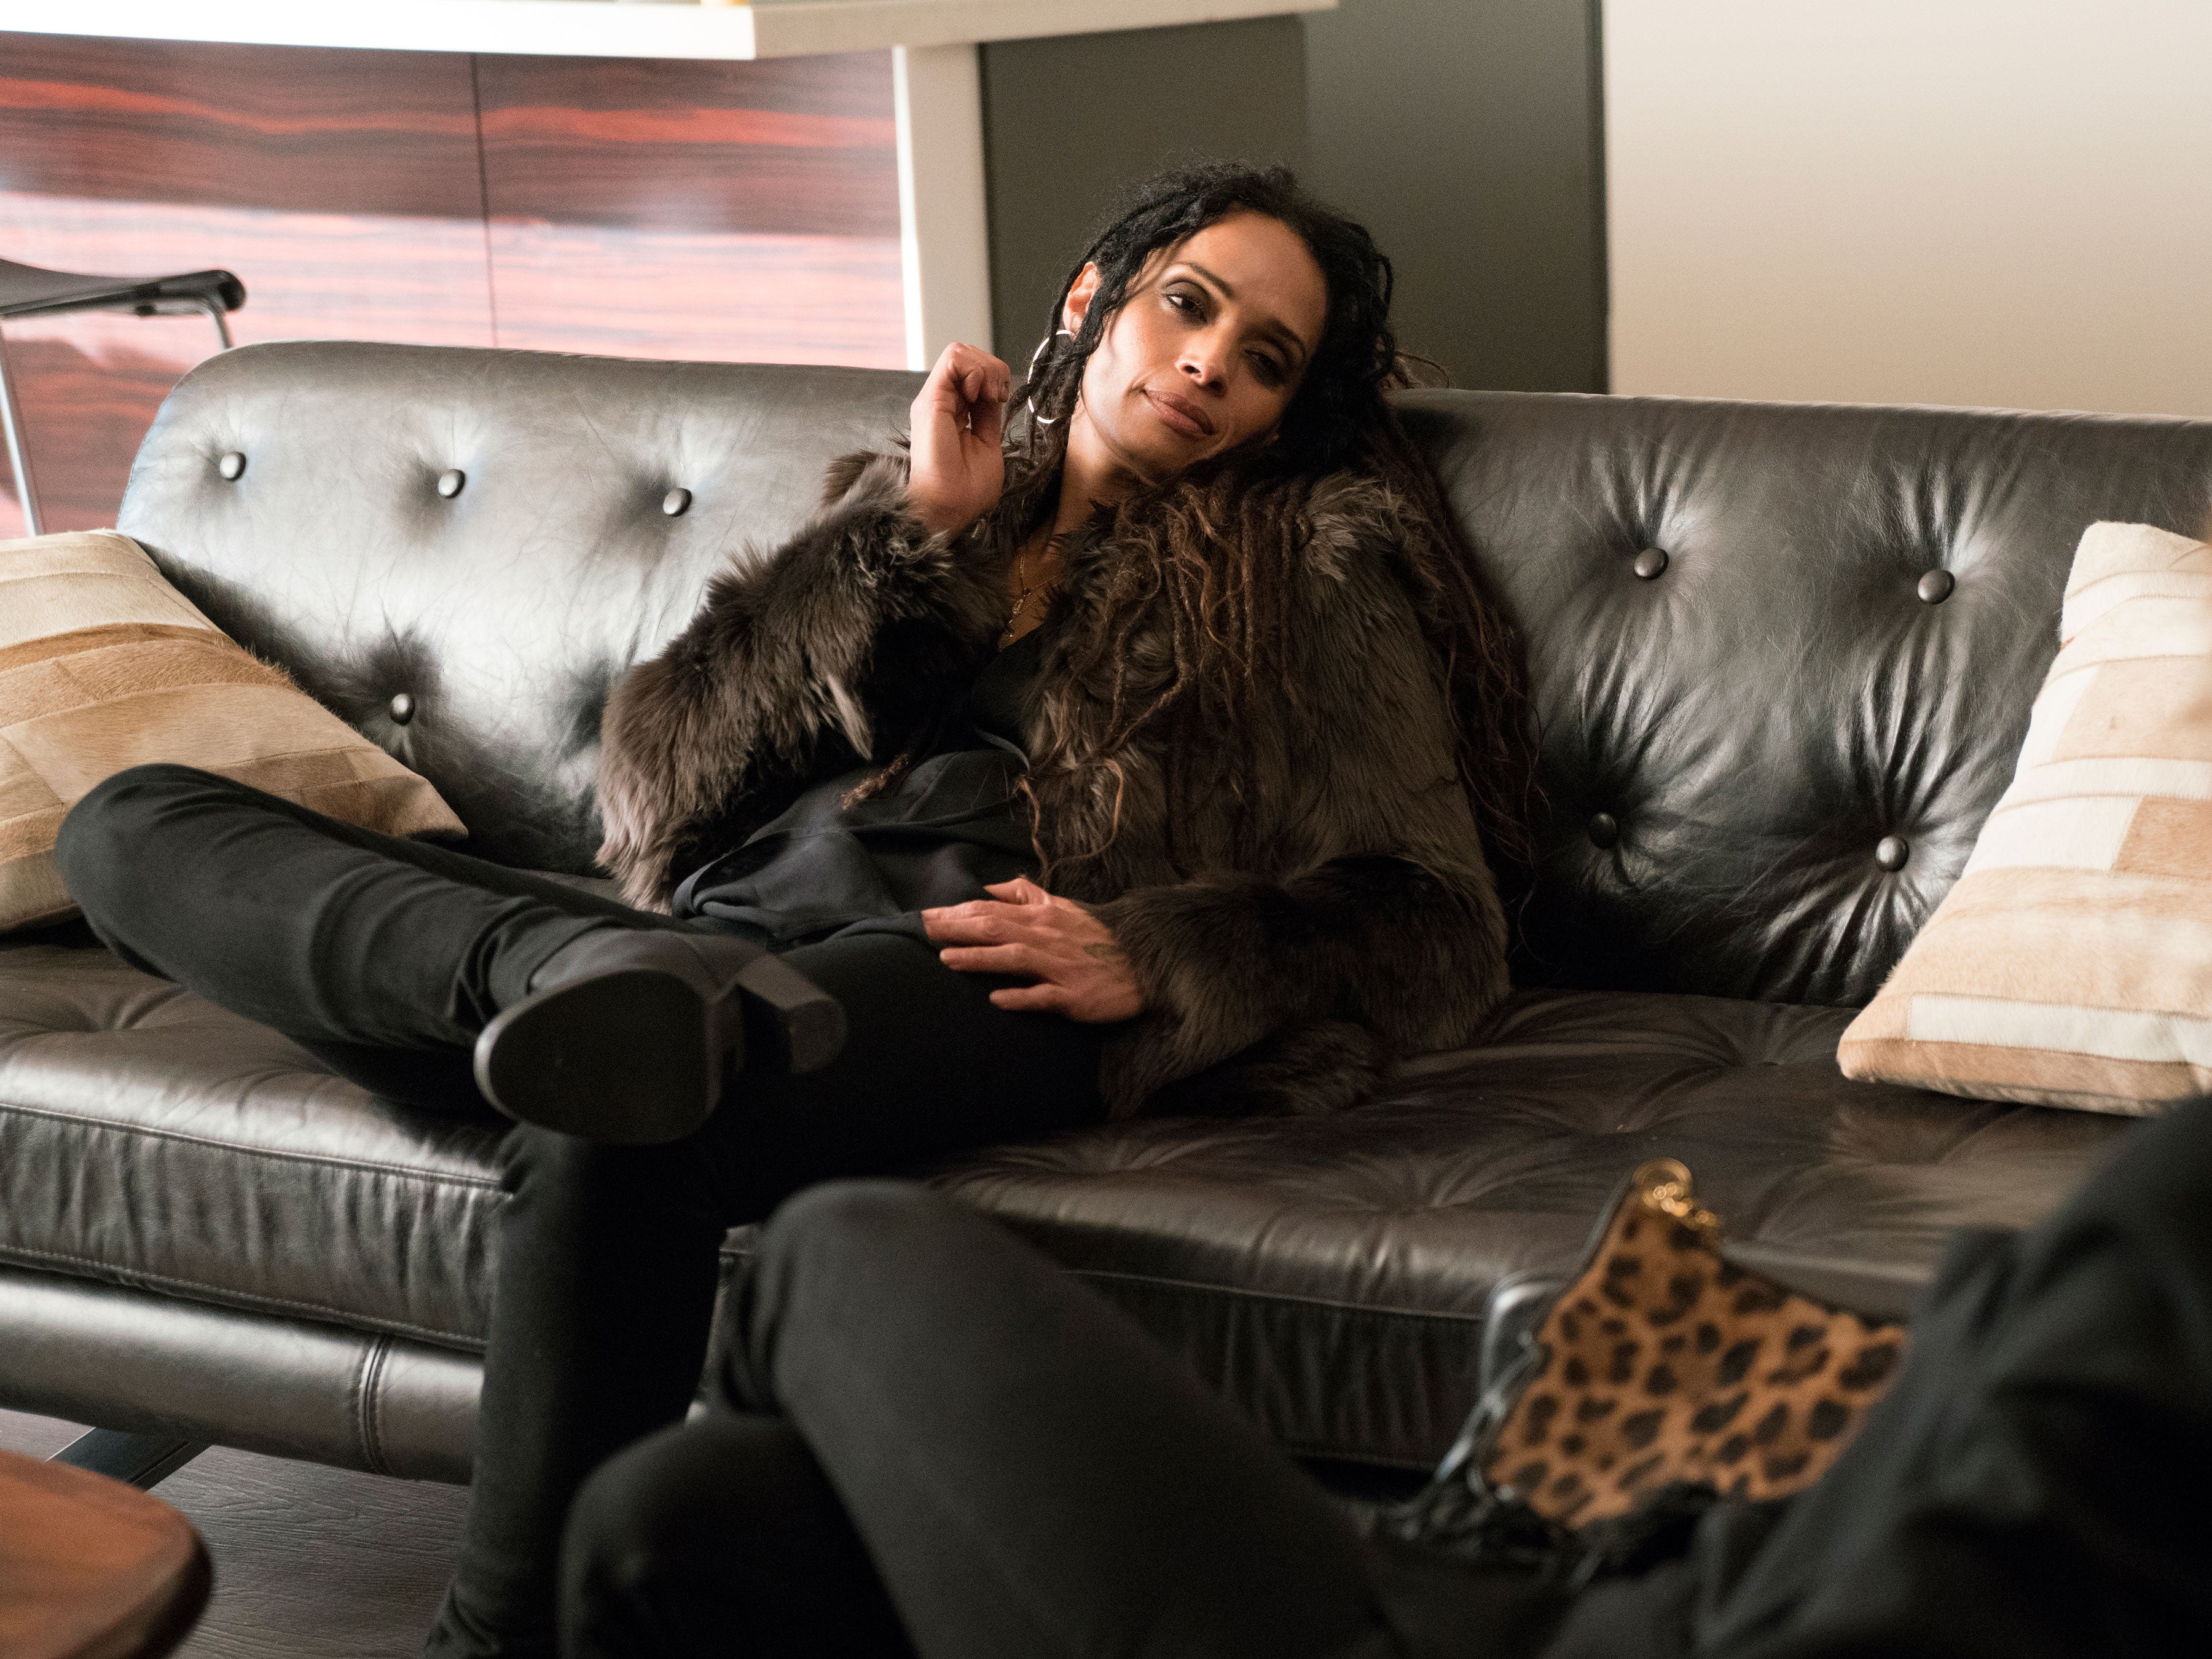 Get Your First Look at Lisa Bonet in Showtime’s ‘Ray Donovan’
